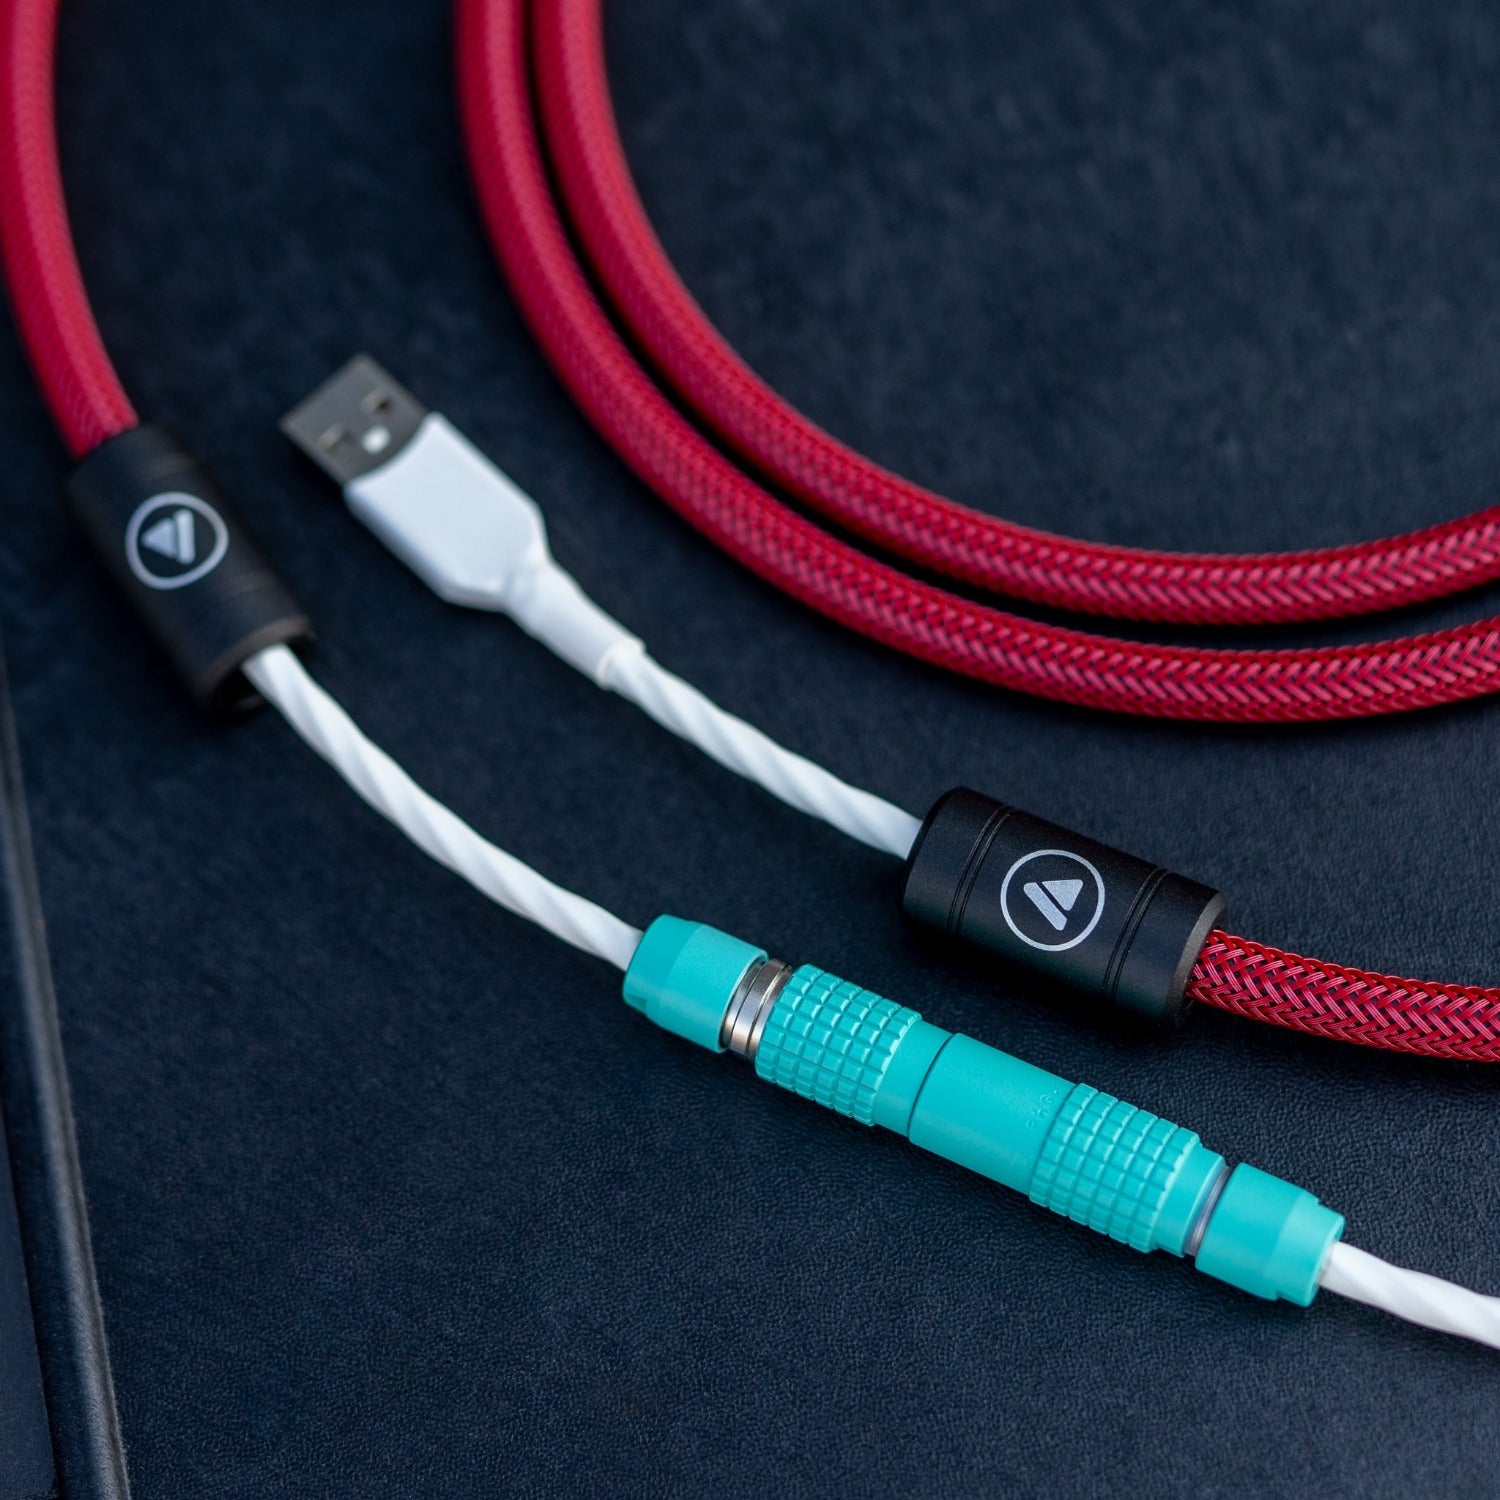 Custom, handmade mechanical keyboard cables. Audiophile style in MDPC-X with ViaBluie splitters and your choice of LEMO or Weipu detachable connectors 